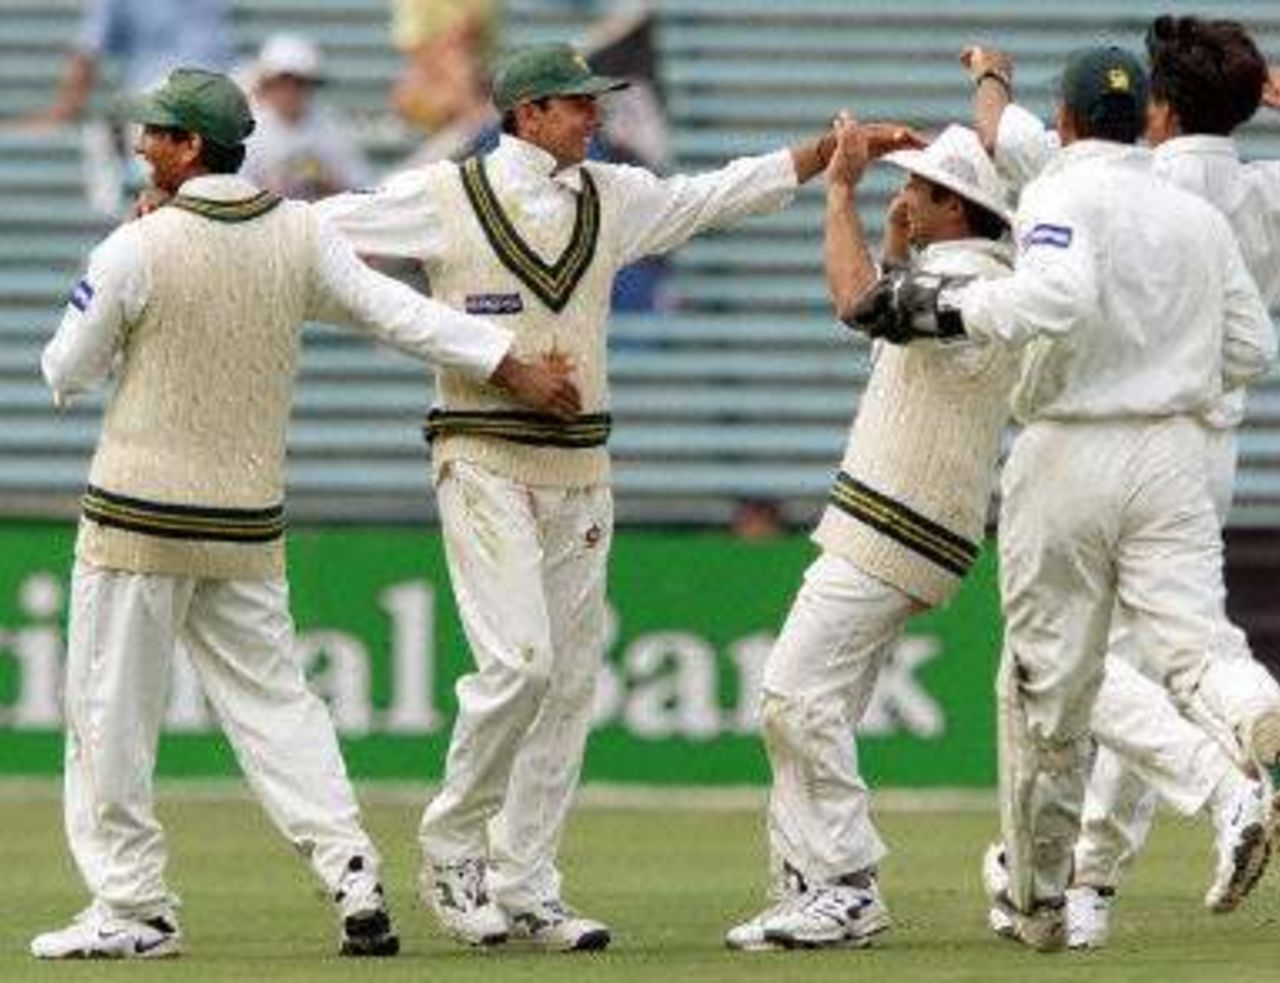 Saqlain Mushtaq being congratulated after taking a sensational catch dismissing Craig McMillan, day 5, 1st Test at Eden Park in Auckland, 8-12 March 2001.